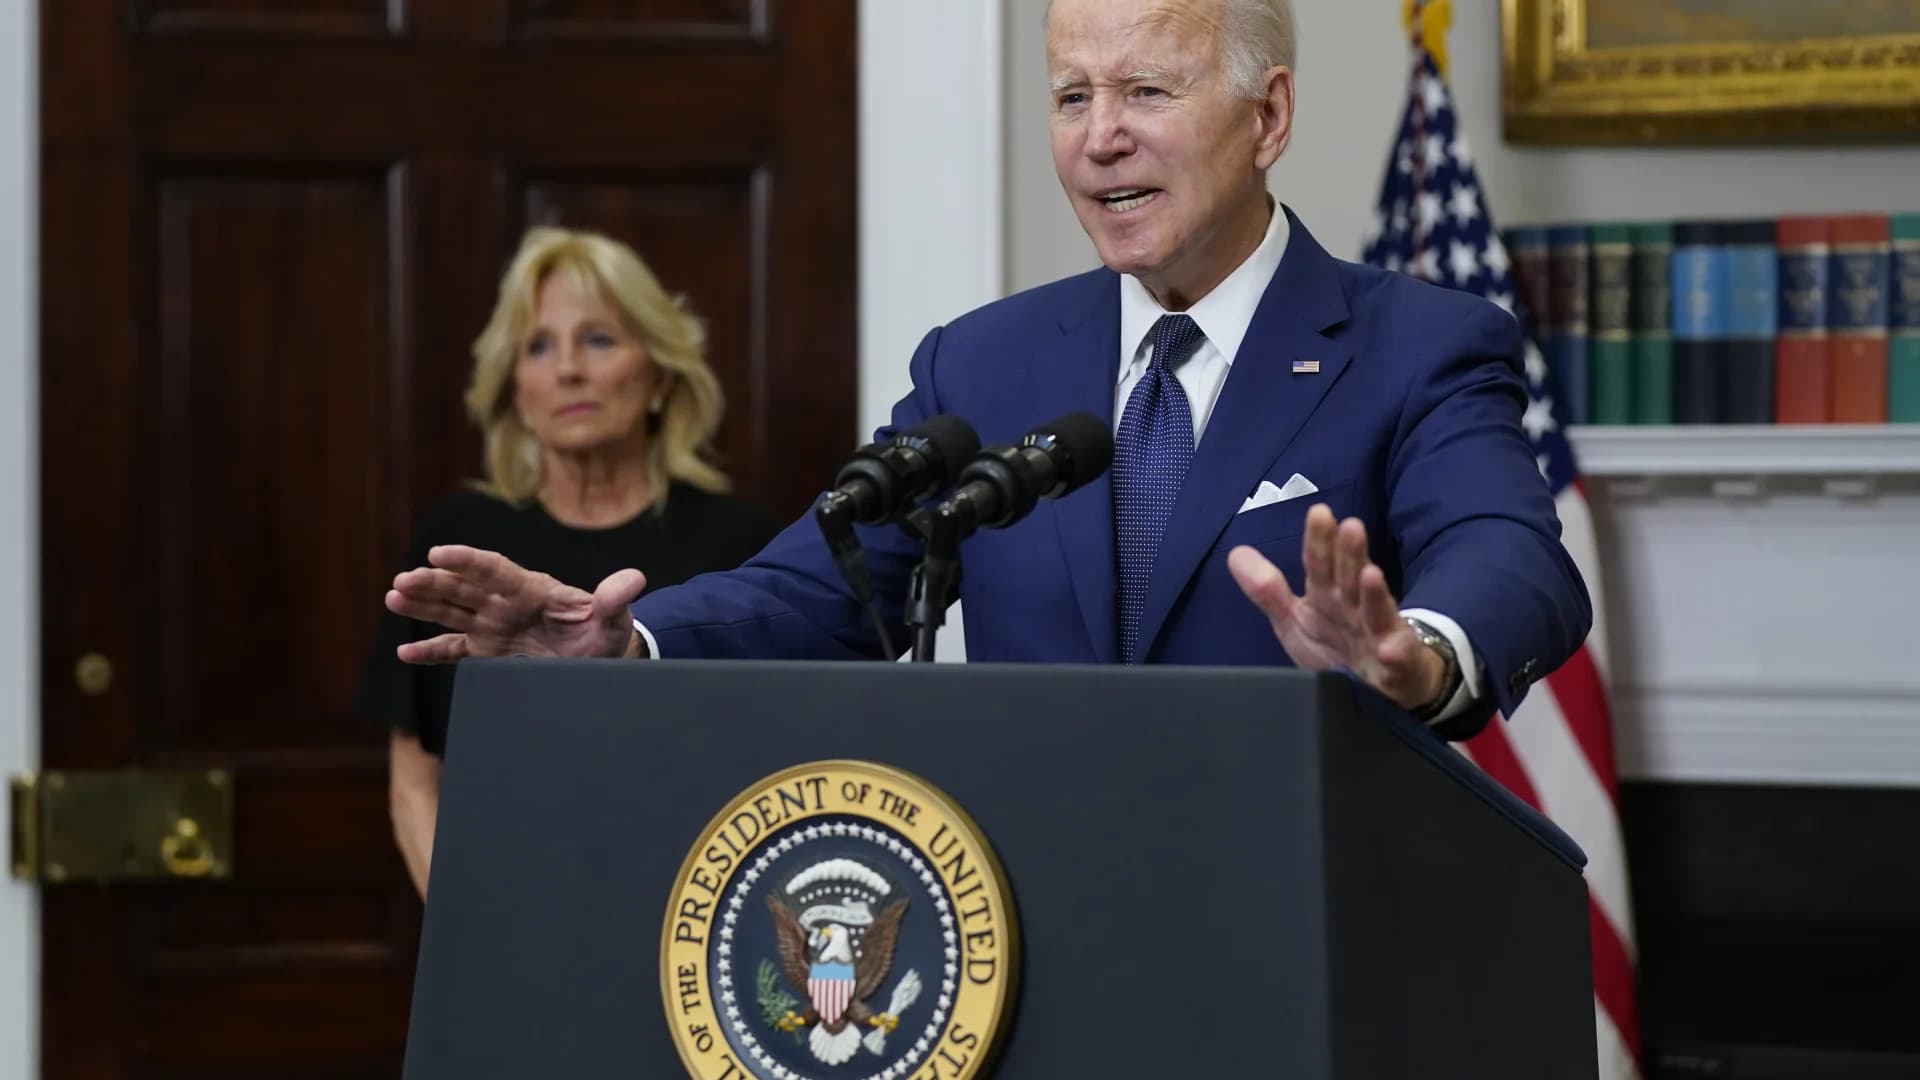 Biden says 'we have to act' after Texas school shooting